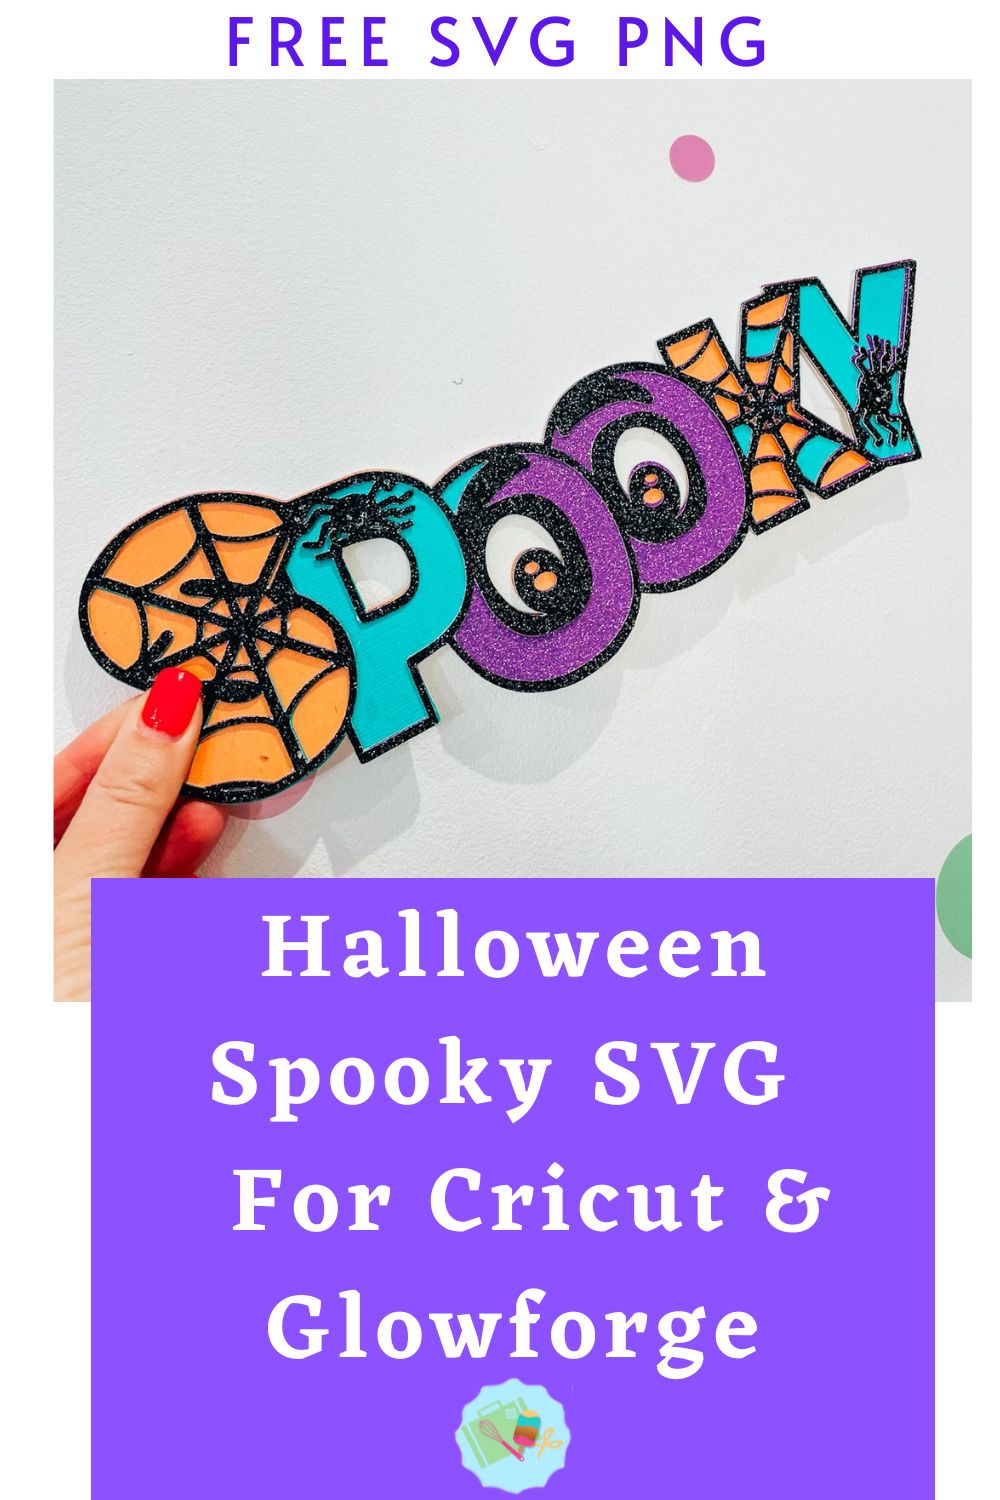 Free Halloween Spooky SVG, PNG for Cricut, Glowforge and Silhouette